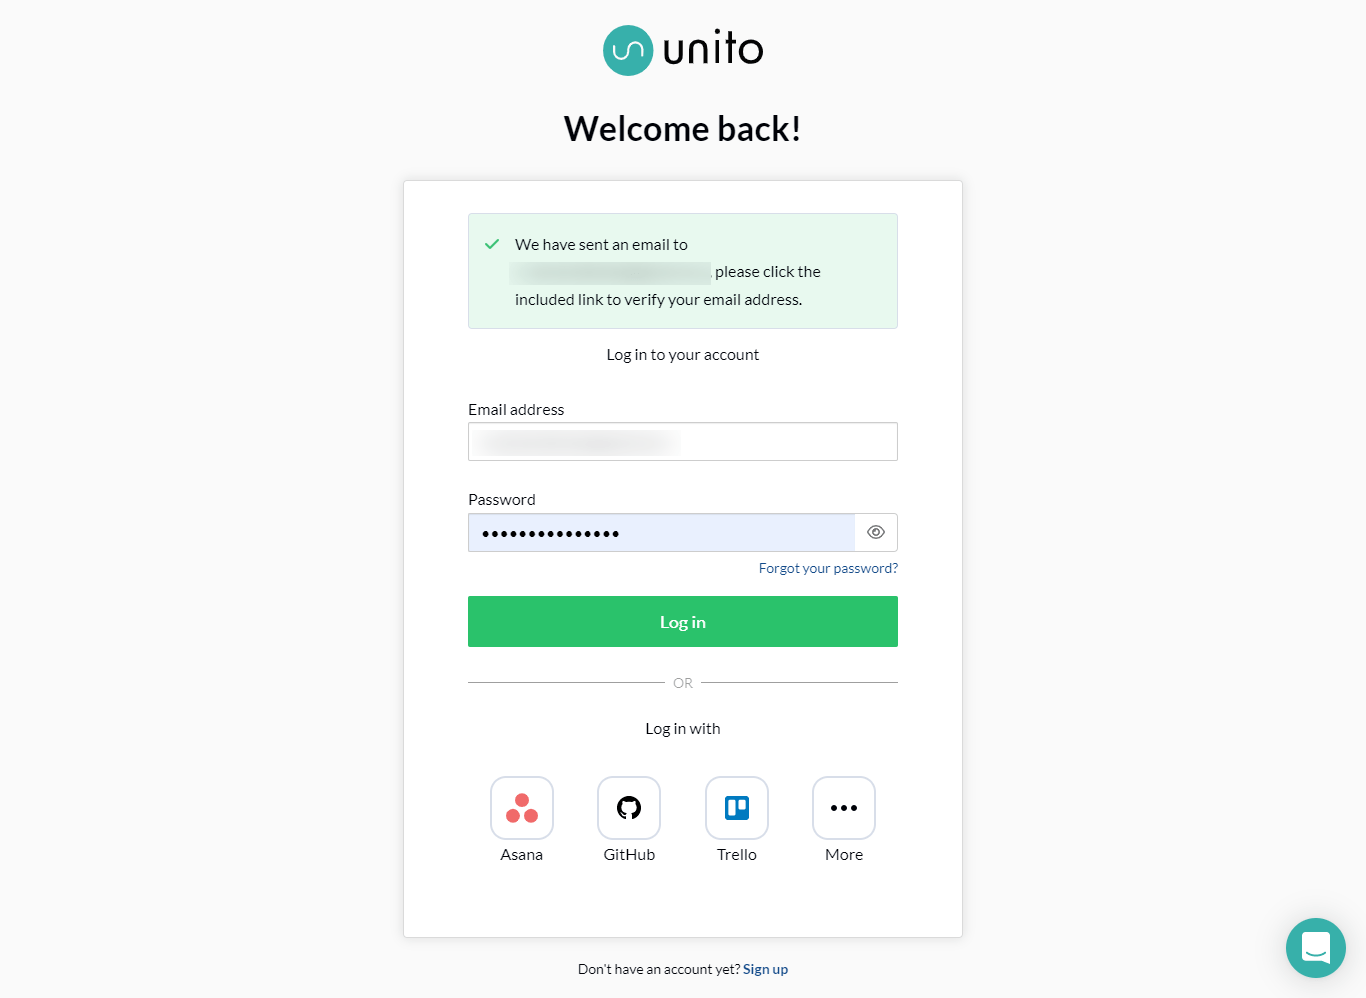 Unito.io login page with message that you have been sent a confirmation email to verify email address